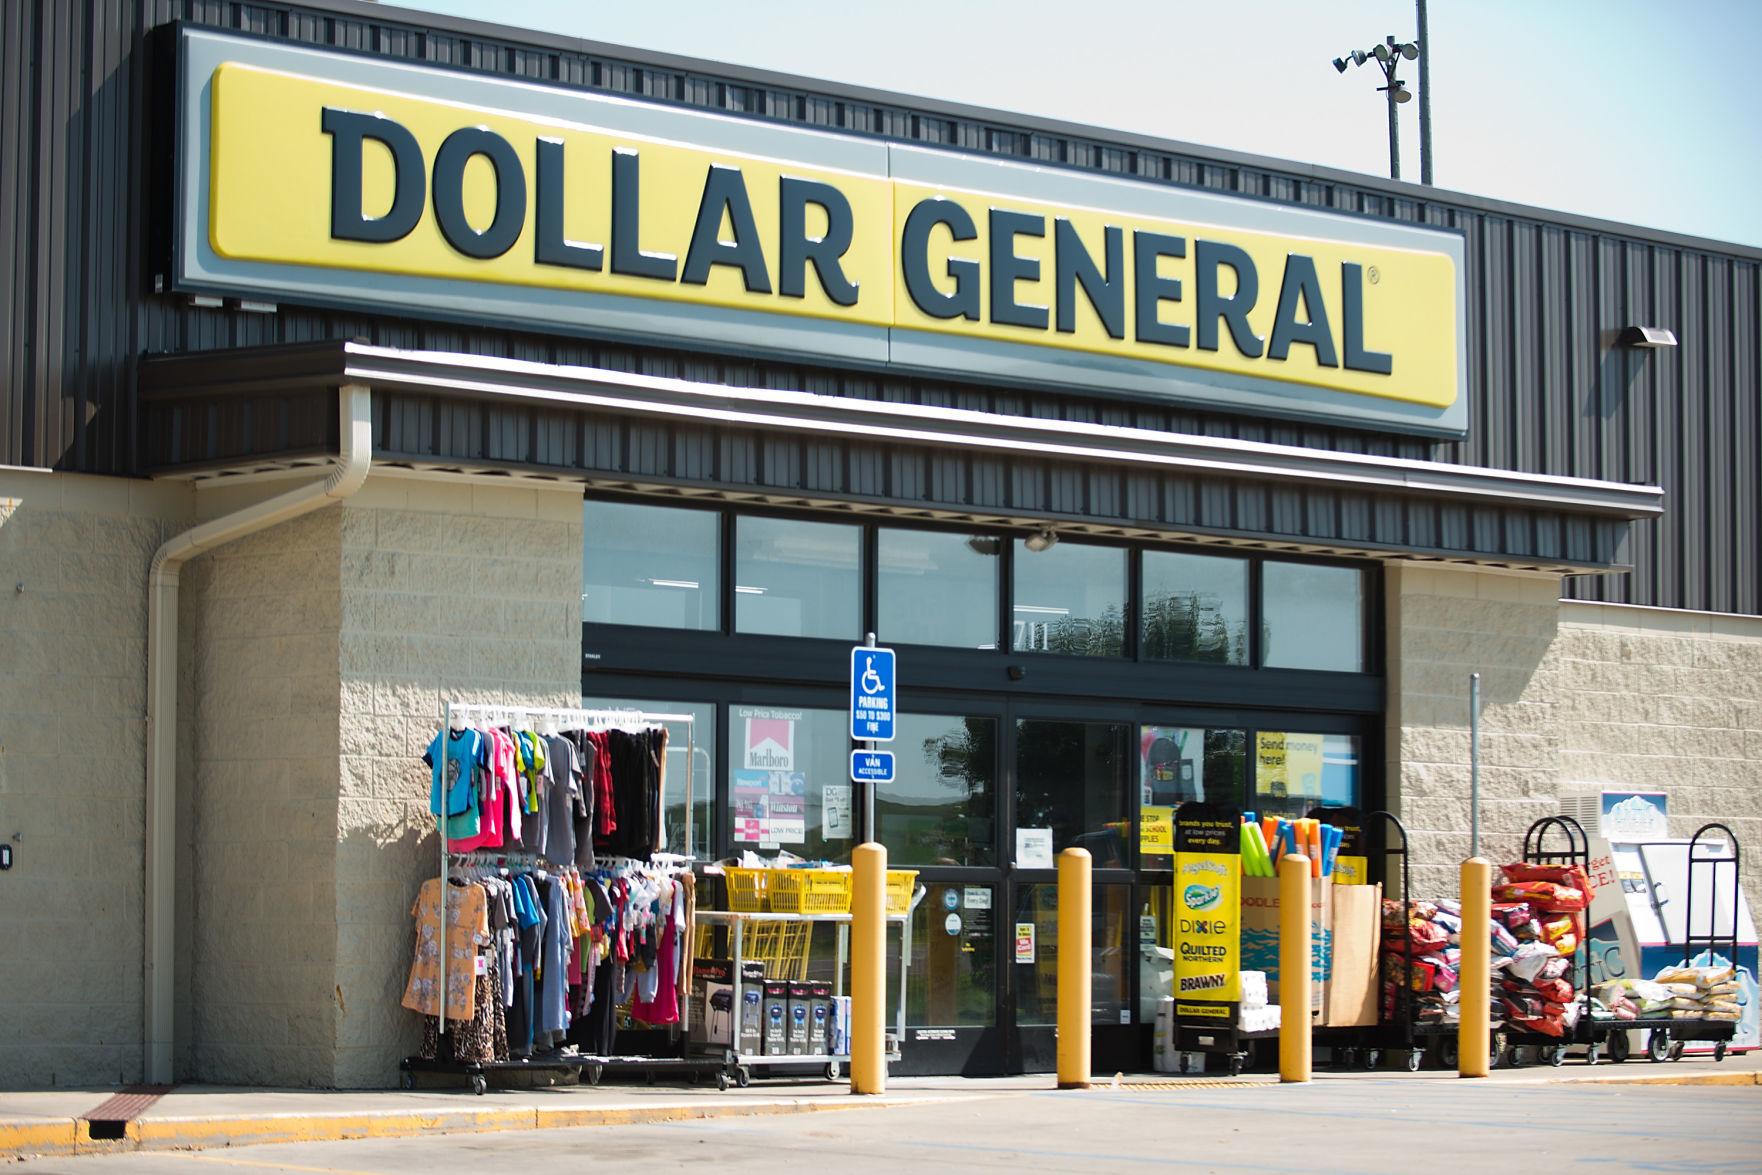 As Dollar General rapidly expands in rural Siouxland, smalltown